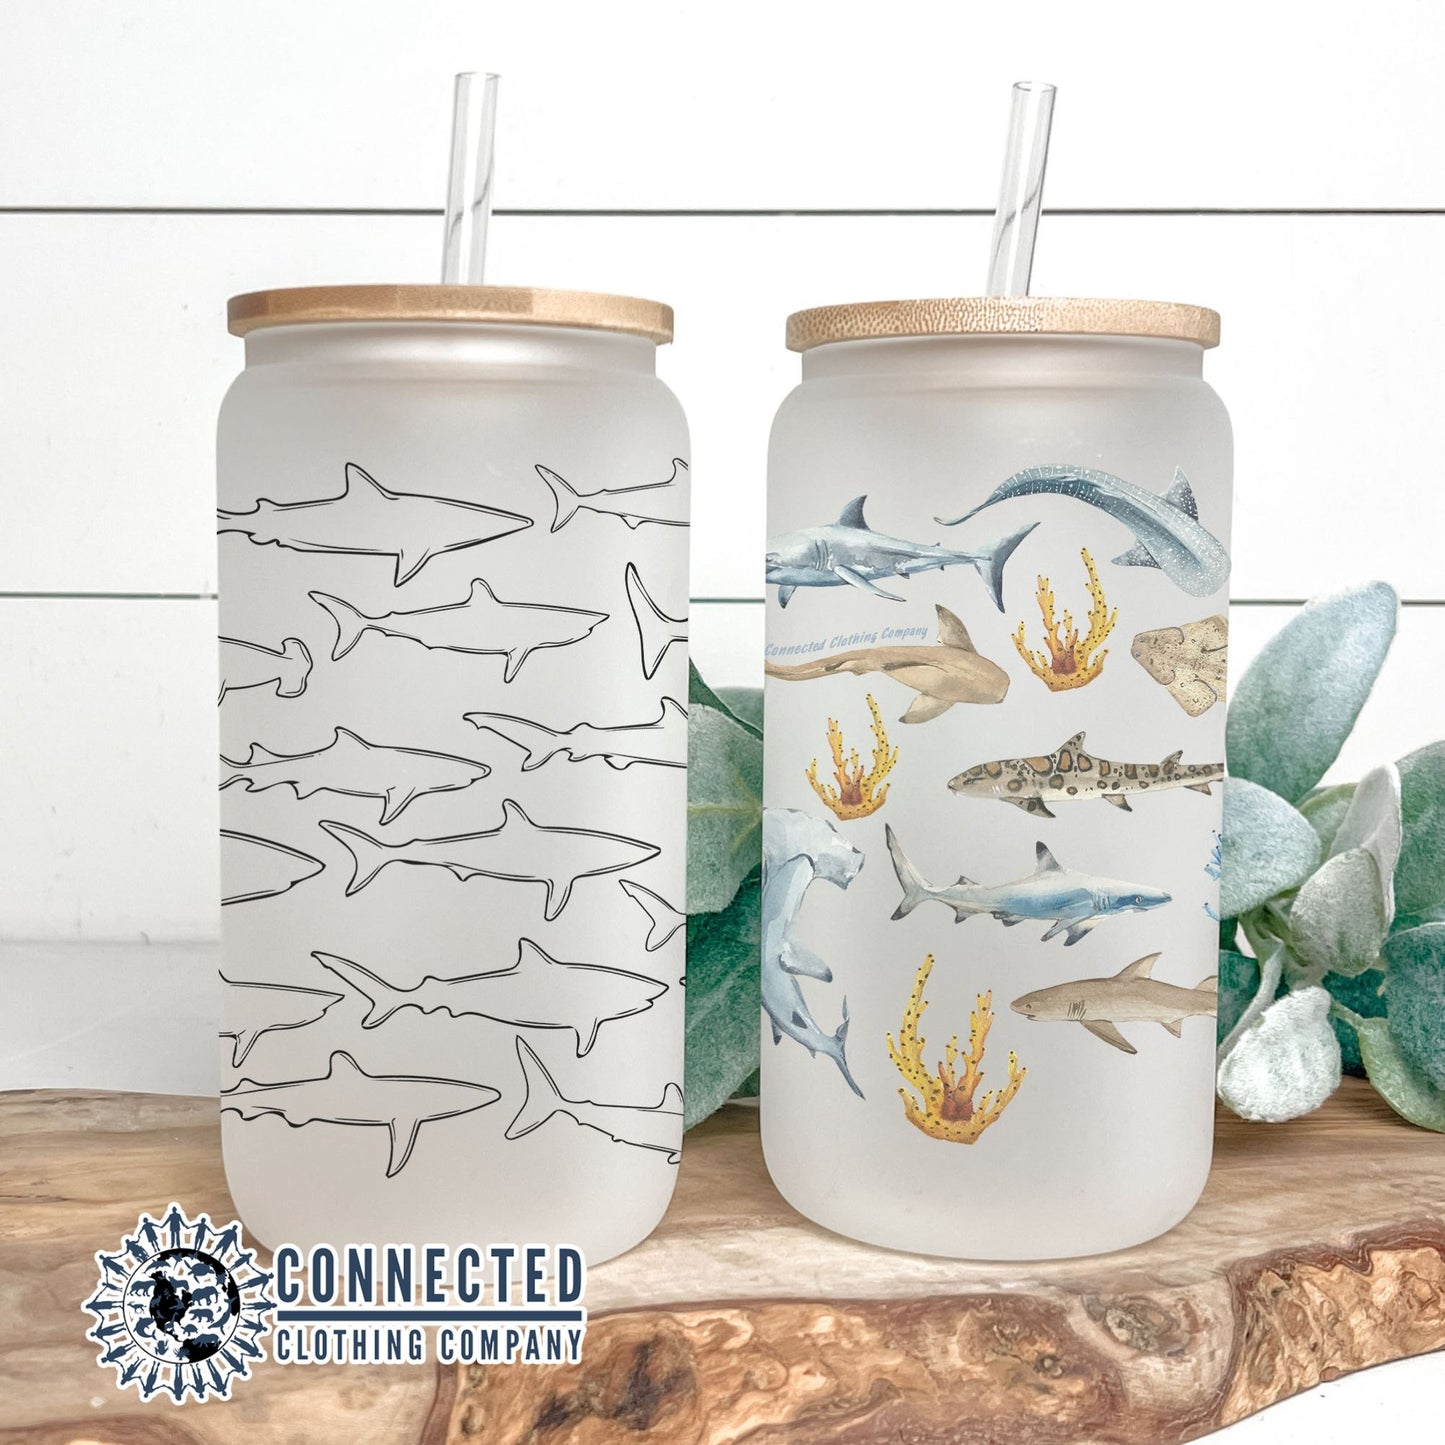 2-Pack Shark Glass Cans - Connected Clothing Company - 10% of proceeds donated to ocean conservation